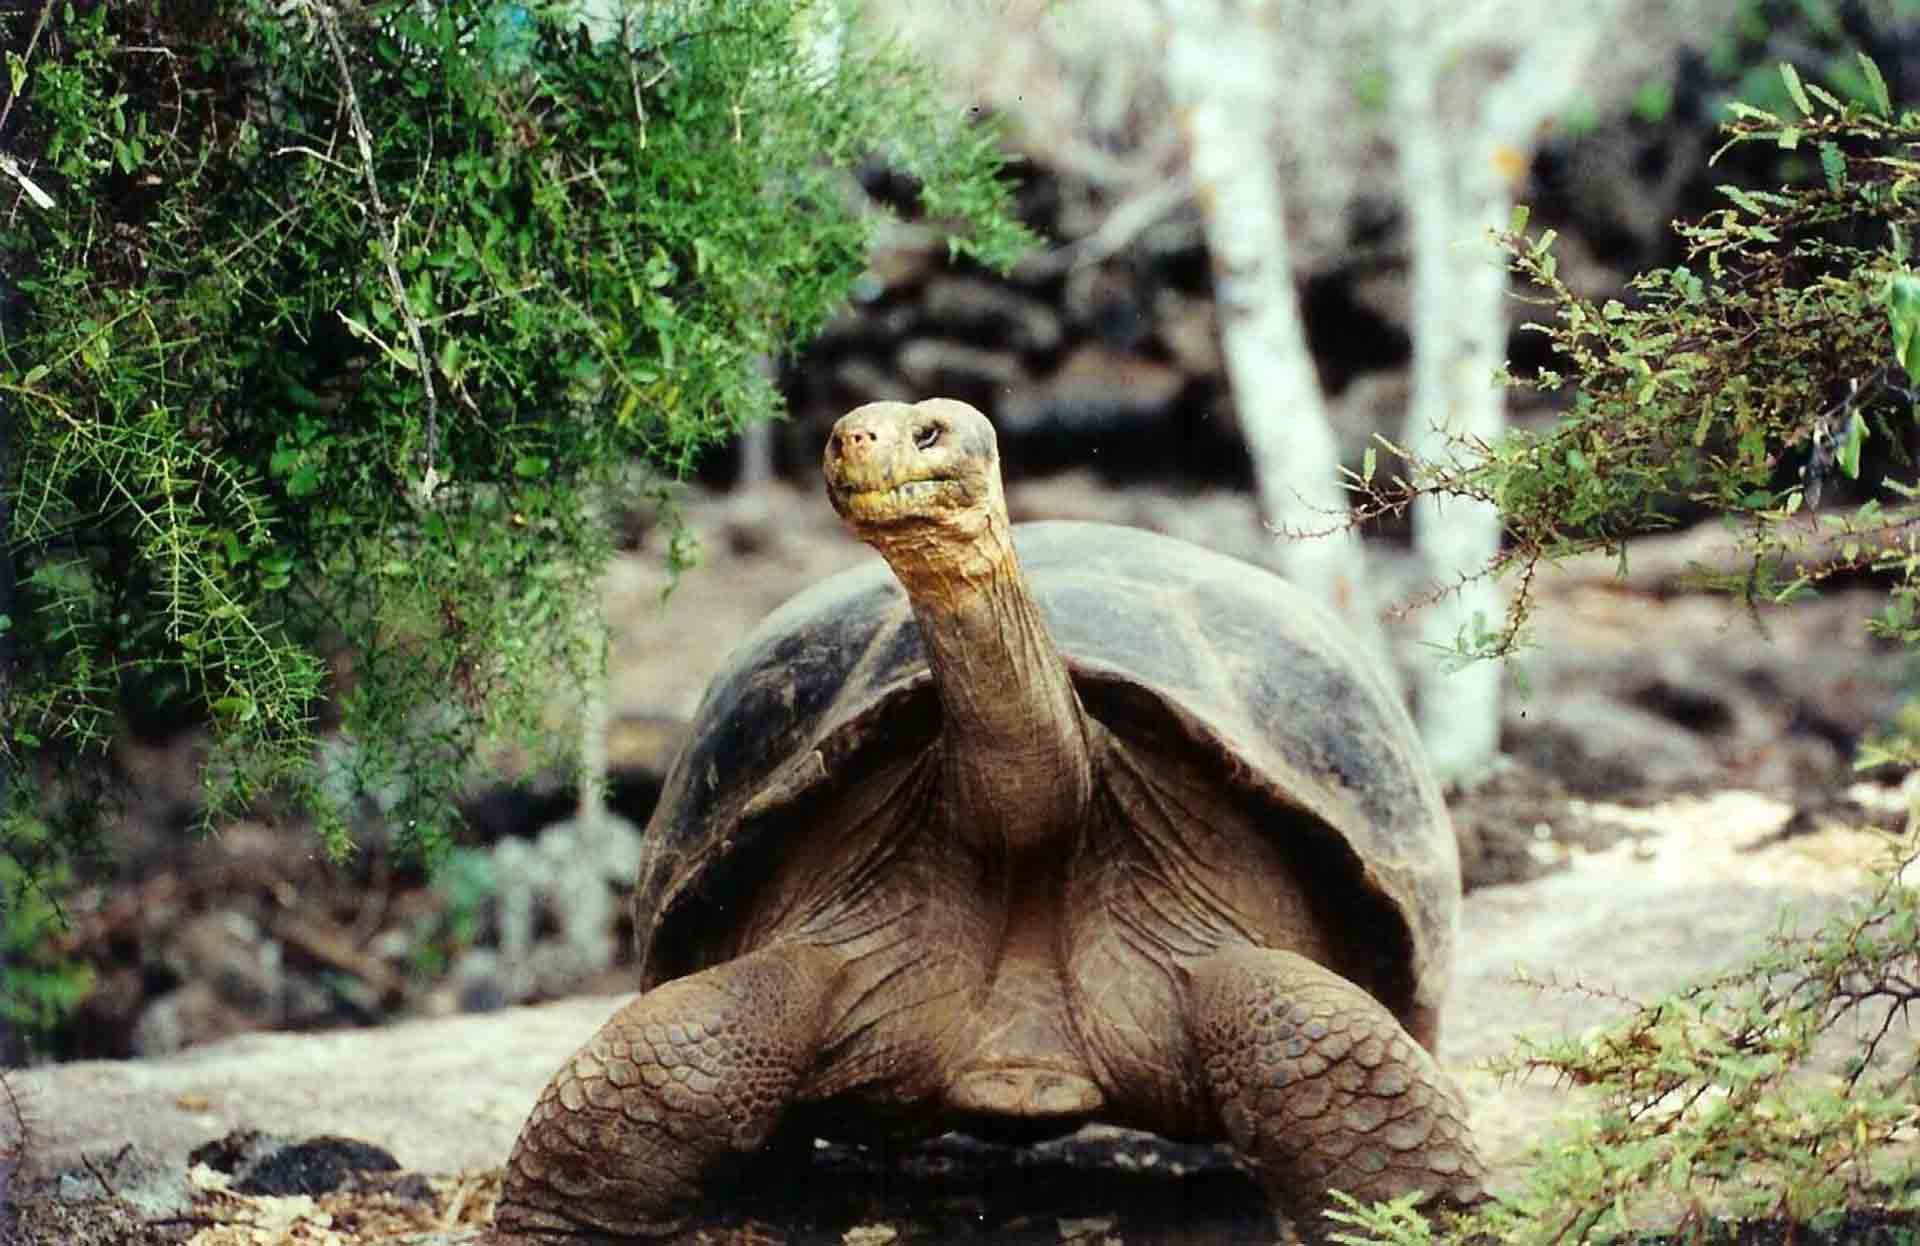 Turtles Can Be Carnivorous, Herbivorous, And Omnivorous